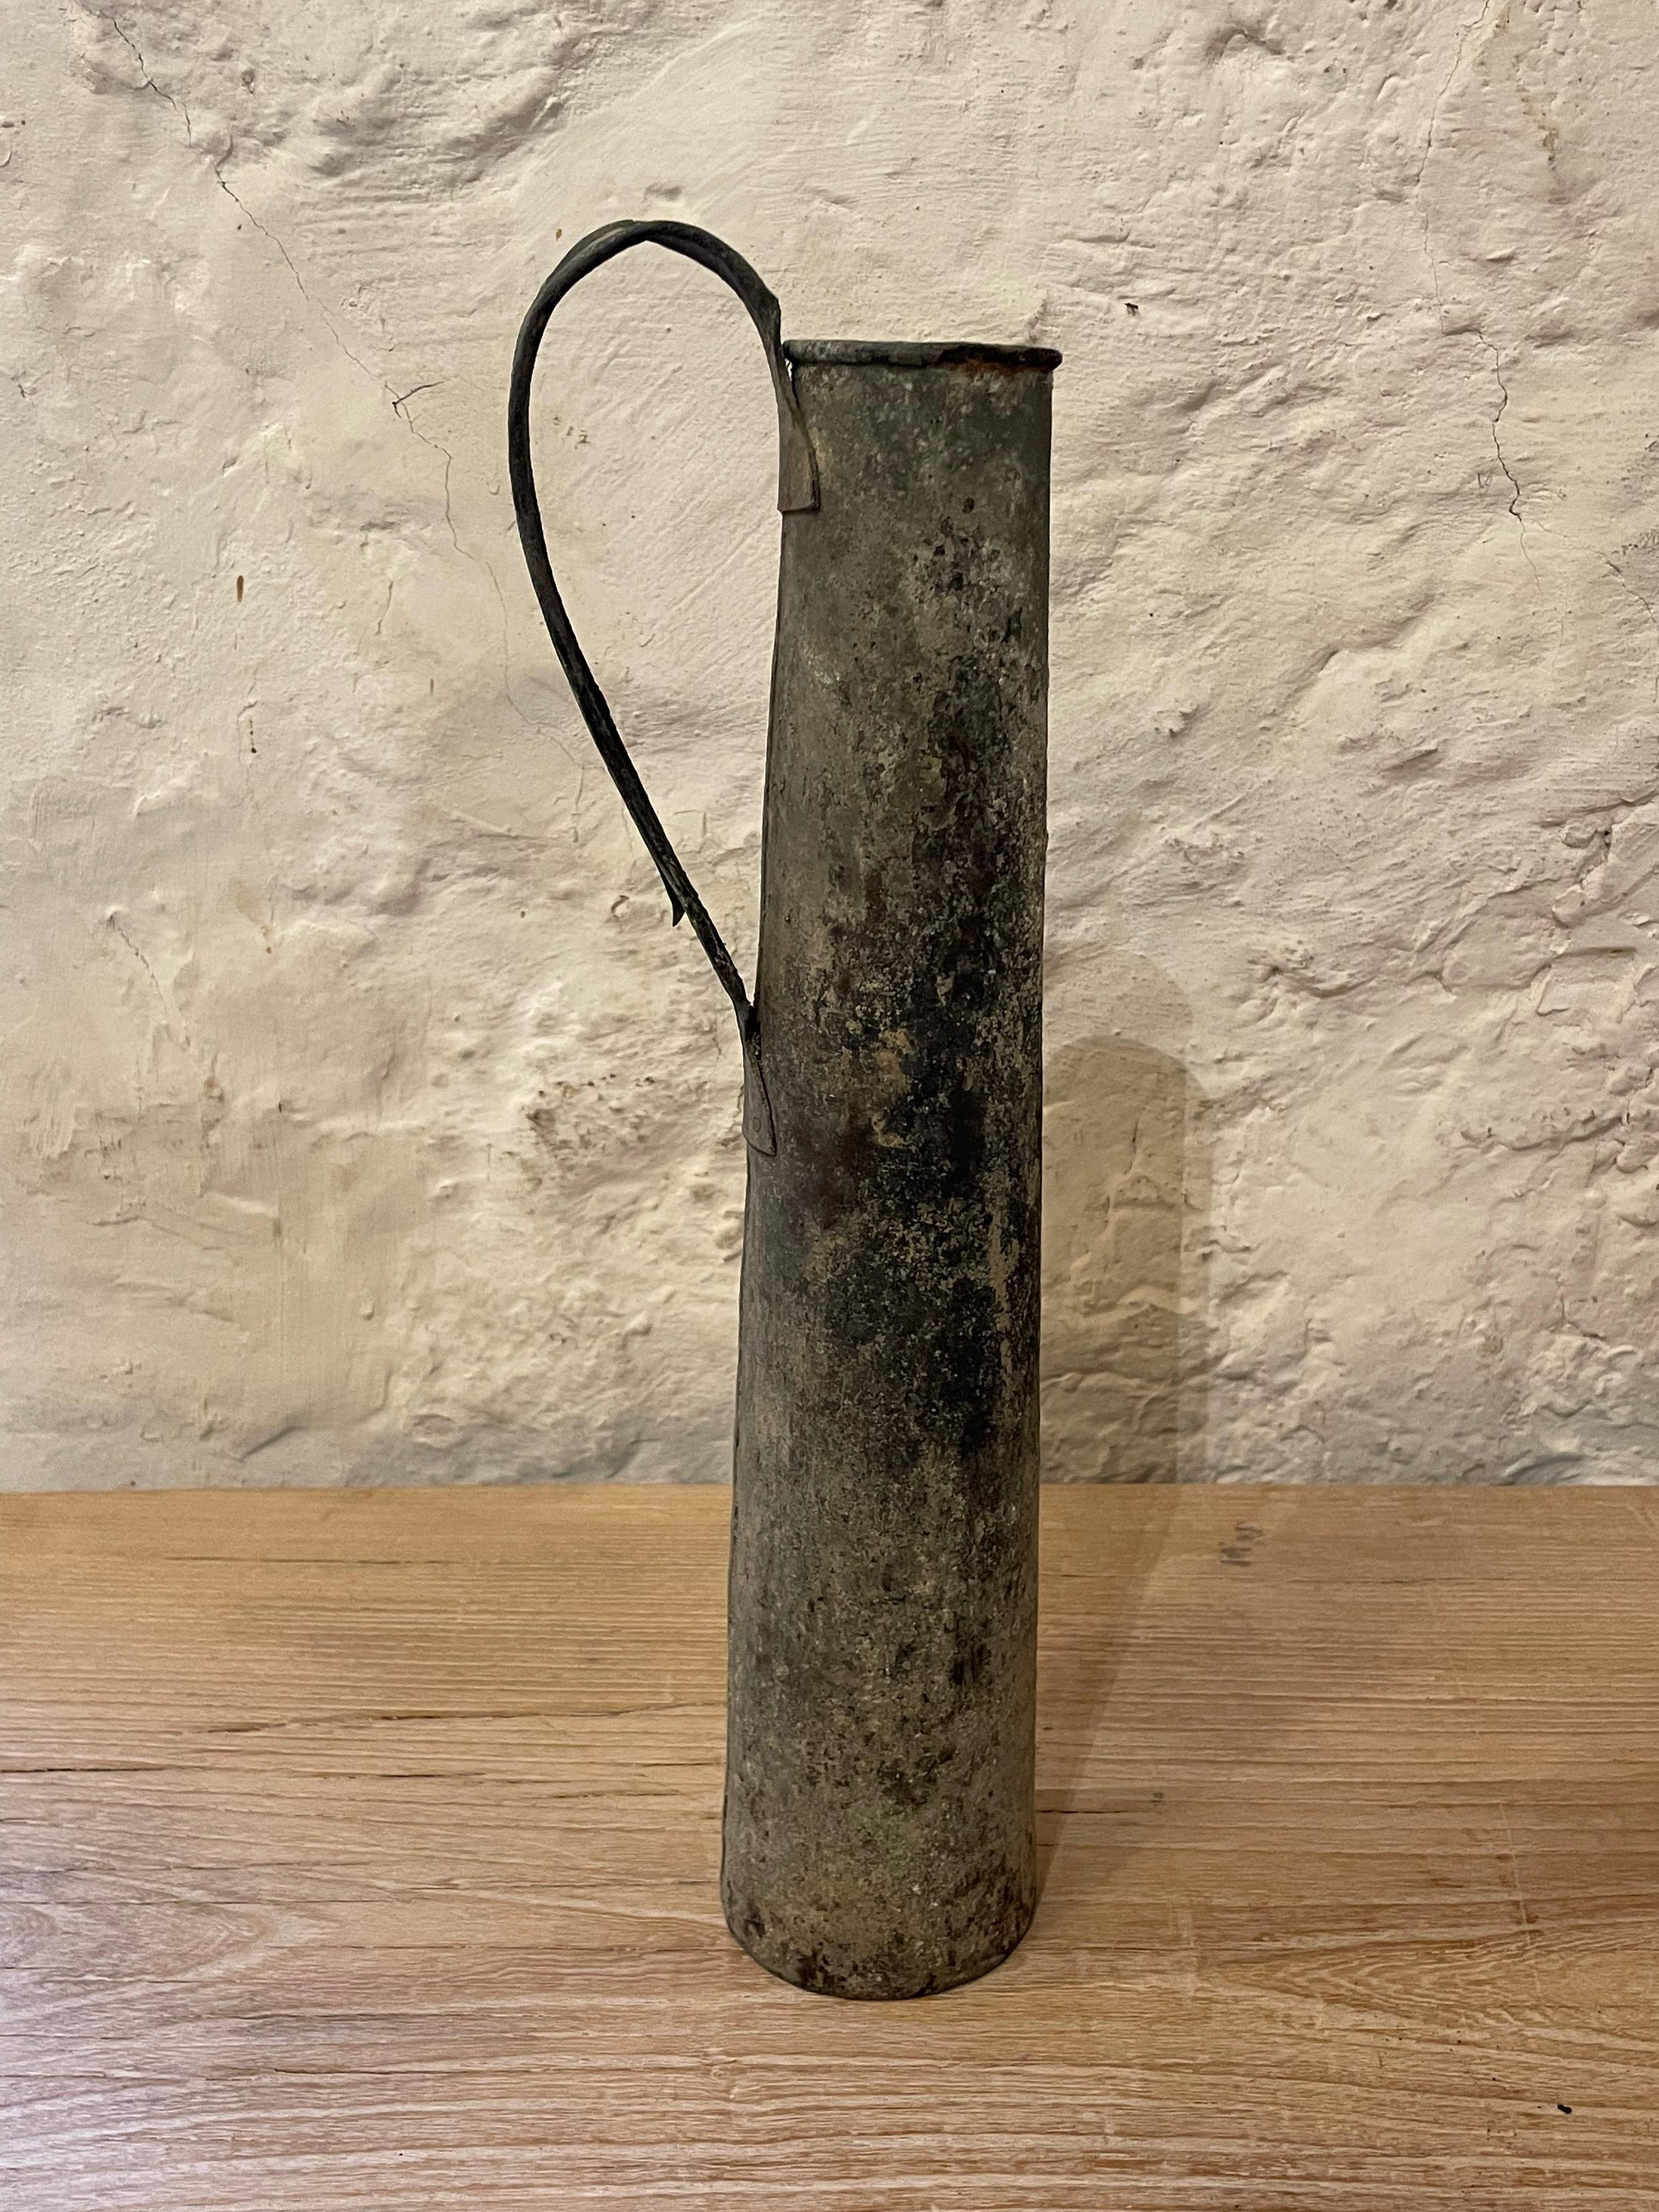 19th century Chinese slim brass water vessel with handle.
Beautiful natural patina.
Three available in different sizes.
ARRIVING APRIL